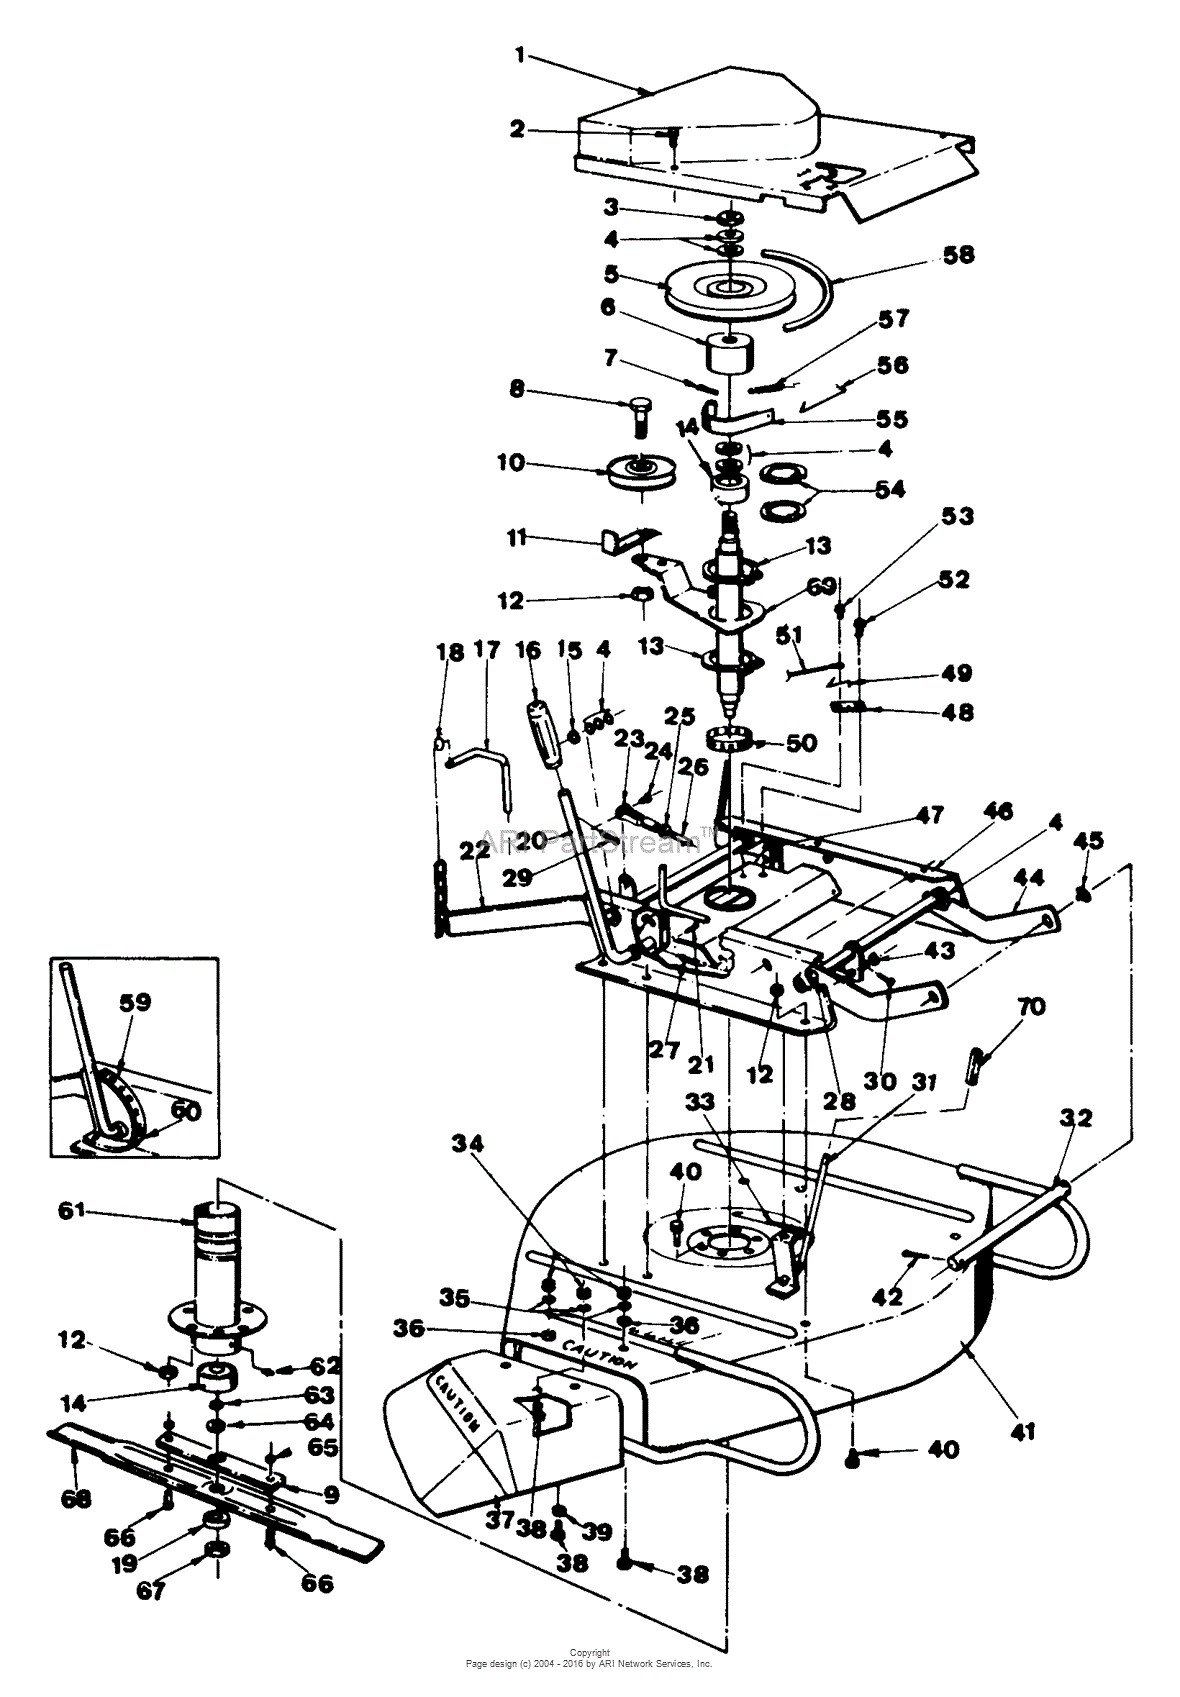 Diagram Of A Lawn Mower Engine Snapper 3080 30" 8 Hp Rear Engine Rider Series 0 Parts Diagram for Of Diagram Of A Lawn Mower Engine